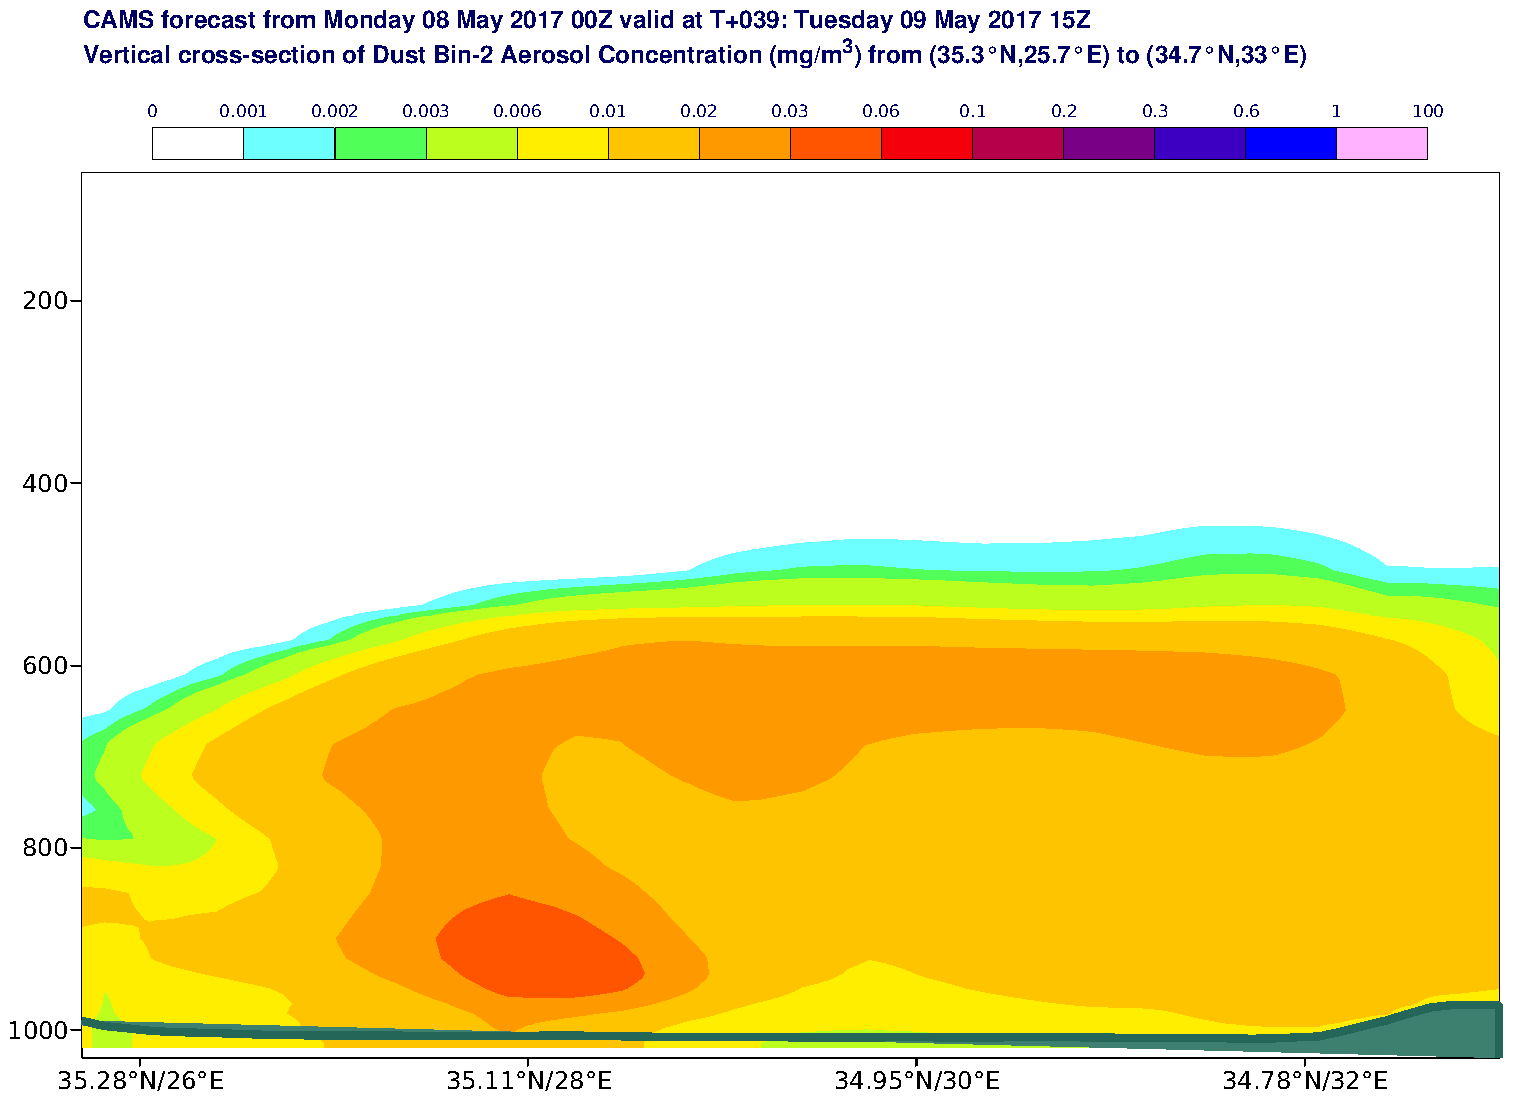 Vertical cross-section of Dust Bin-2 Aerosol Concentration (mg/m3) valid at T39 - 2017-05-09 15:00